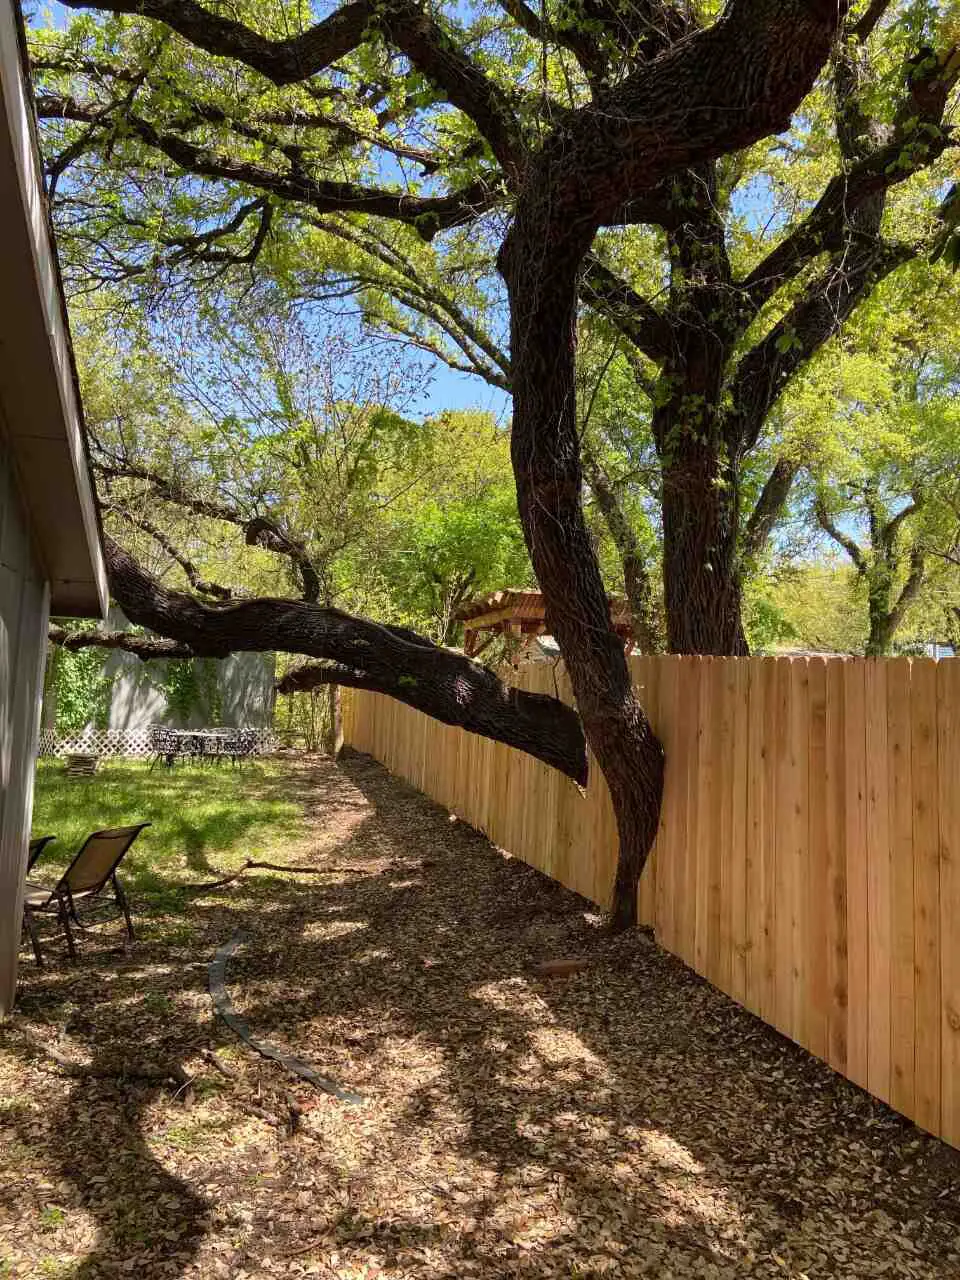 ix foot privacy fence built around an existing tree